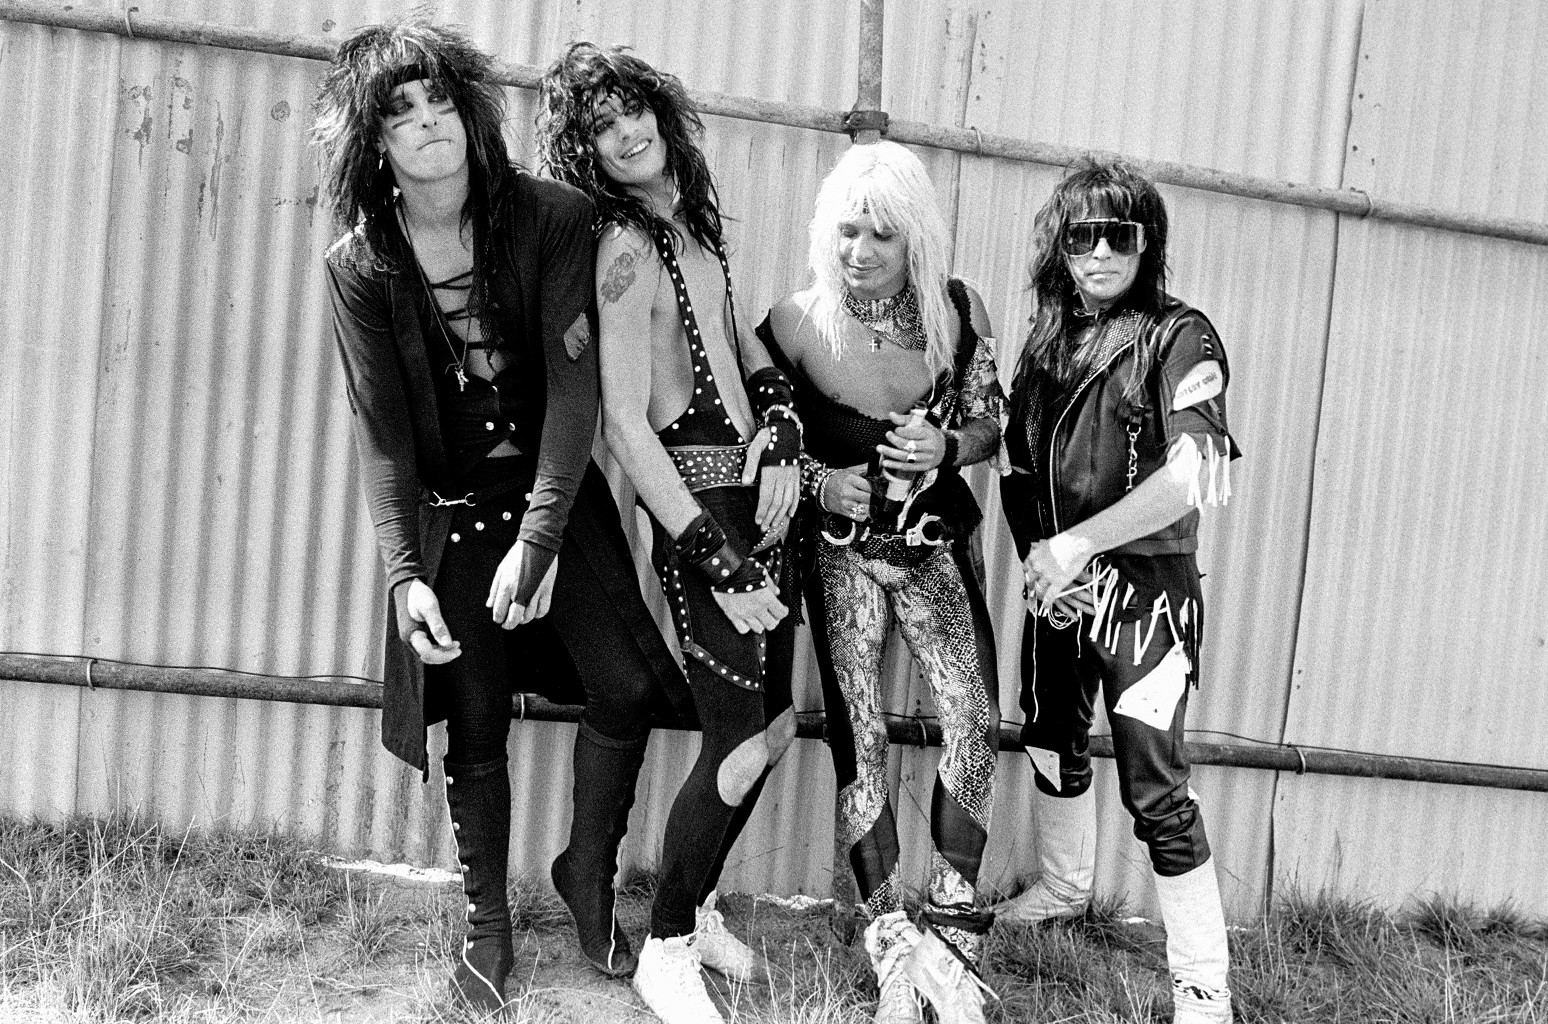 In 2006, Mötley Crüe embarked on a reunion tour with the band's original four members